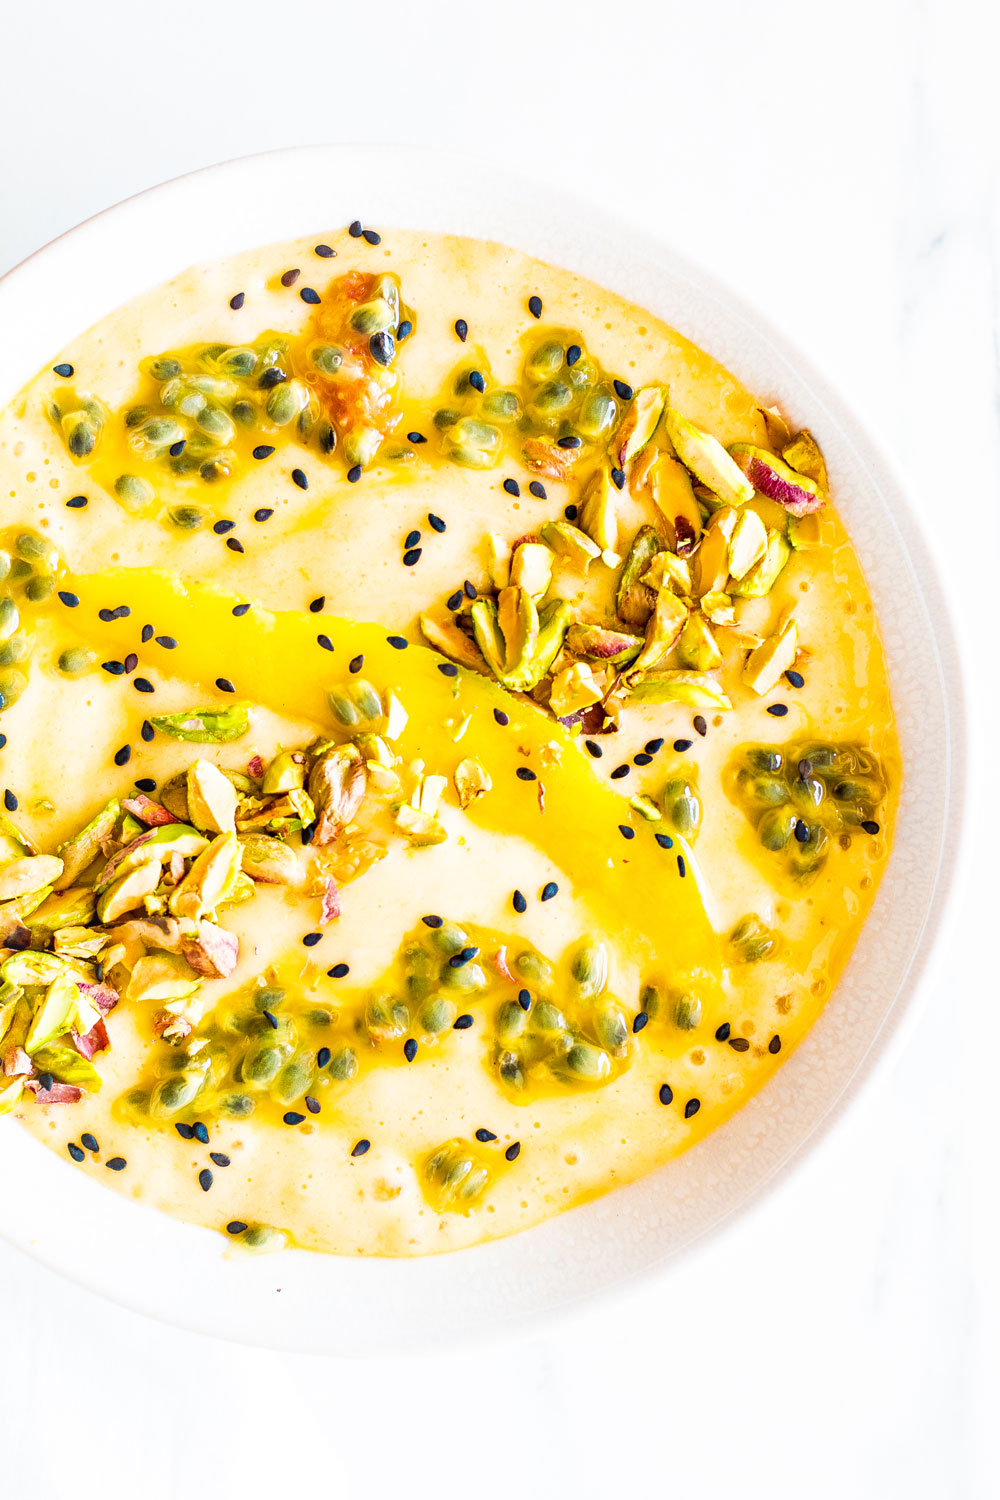 This Mango, Banana & Passion Fruit Smoothie Bowl is a thick blend of frozen and fresh fruit, topped with nuts and seeds that's easy, nutritious, and fun to eat and prepare. https://www.spotebi.com/recipes/mango-banana-passion-fruit-smoothie-bowl/